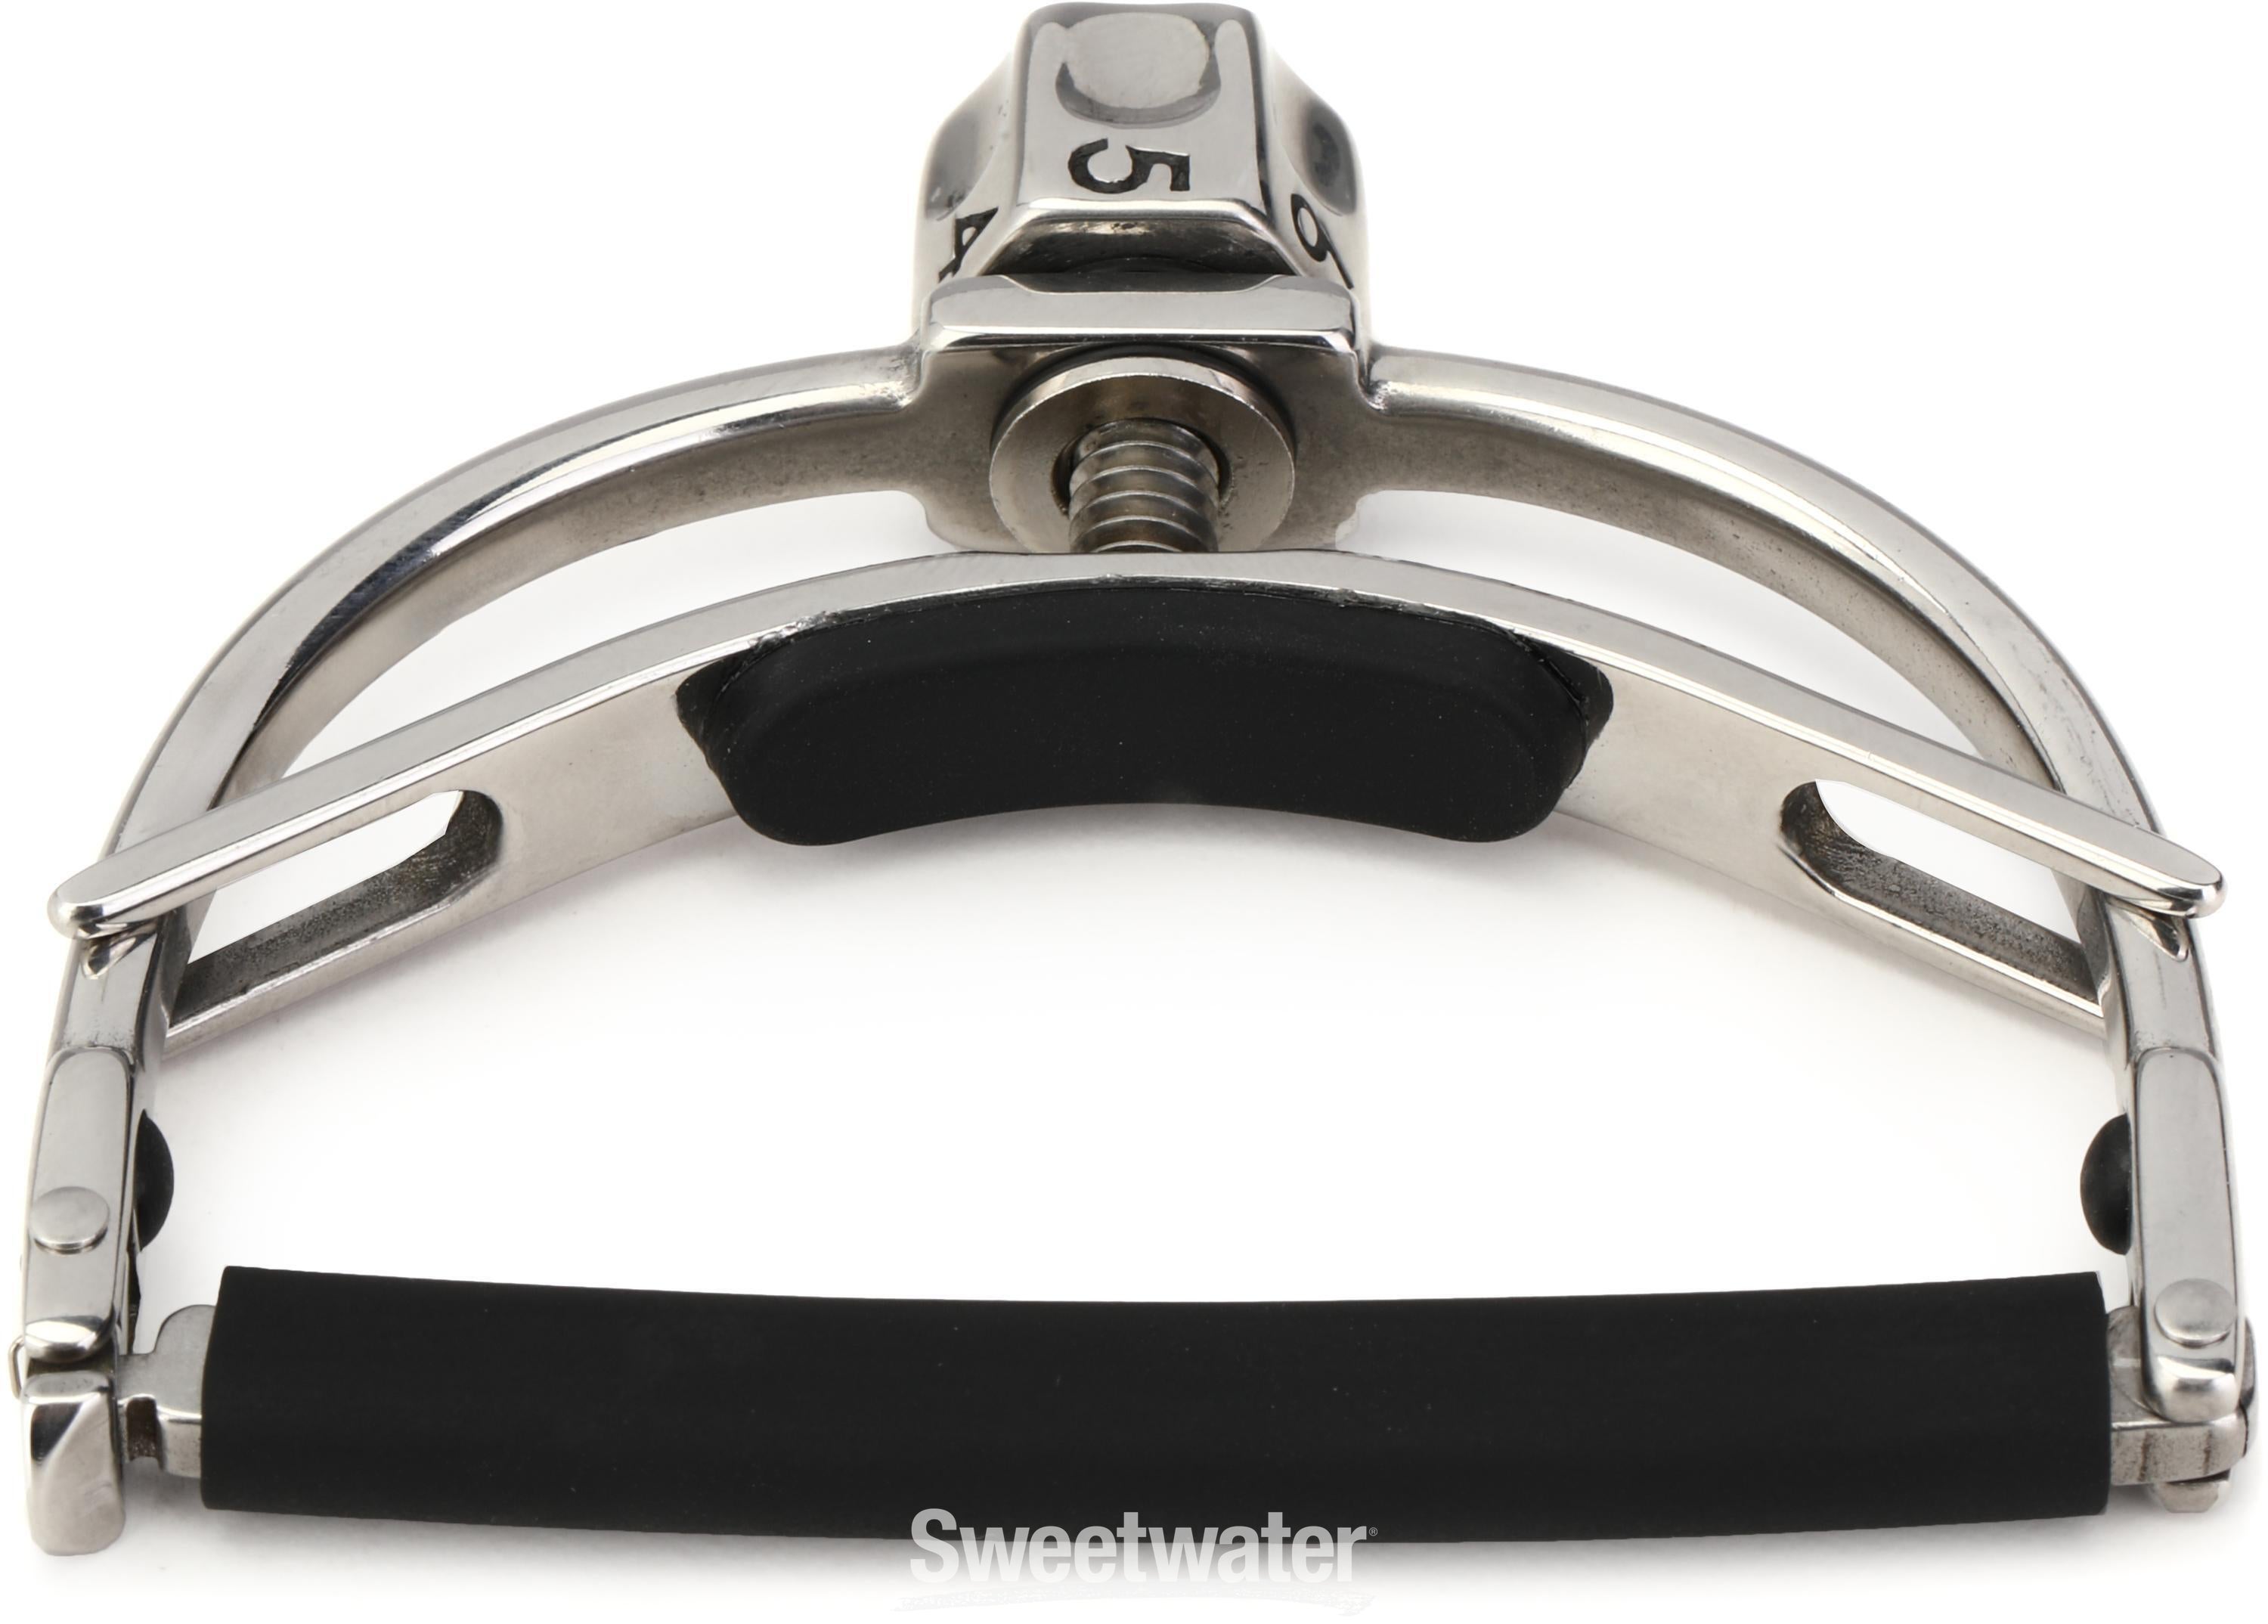 Shubb F3 FineTune Capo for 12-string Guitar - Stainless Steel